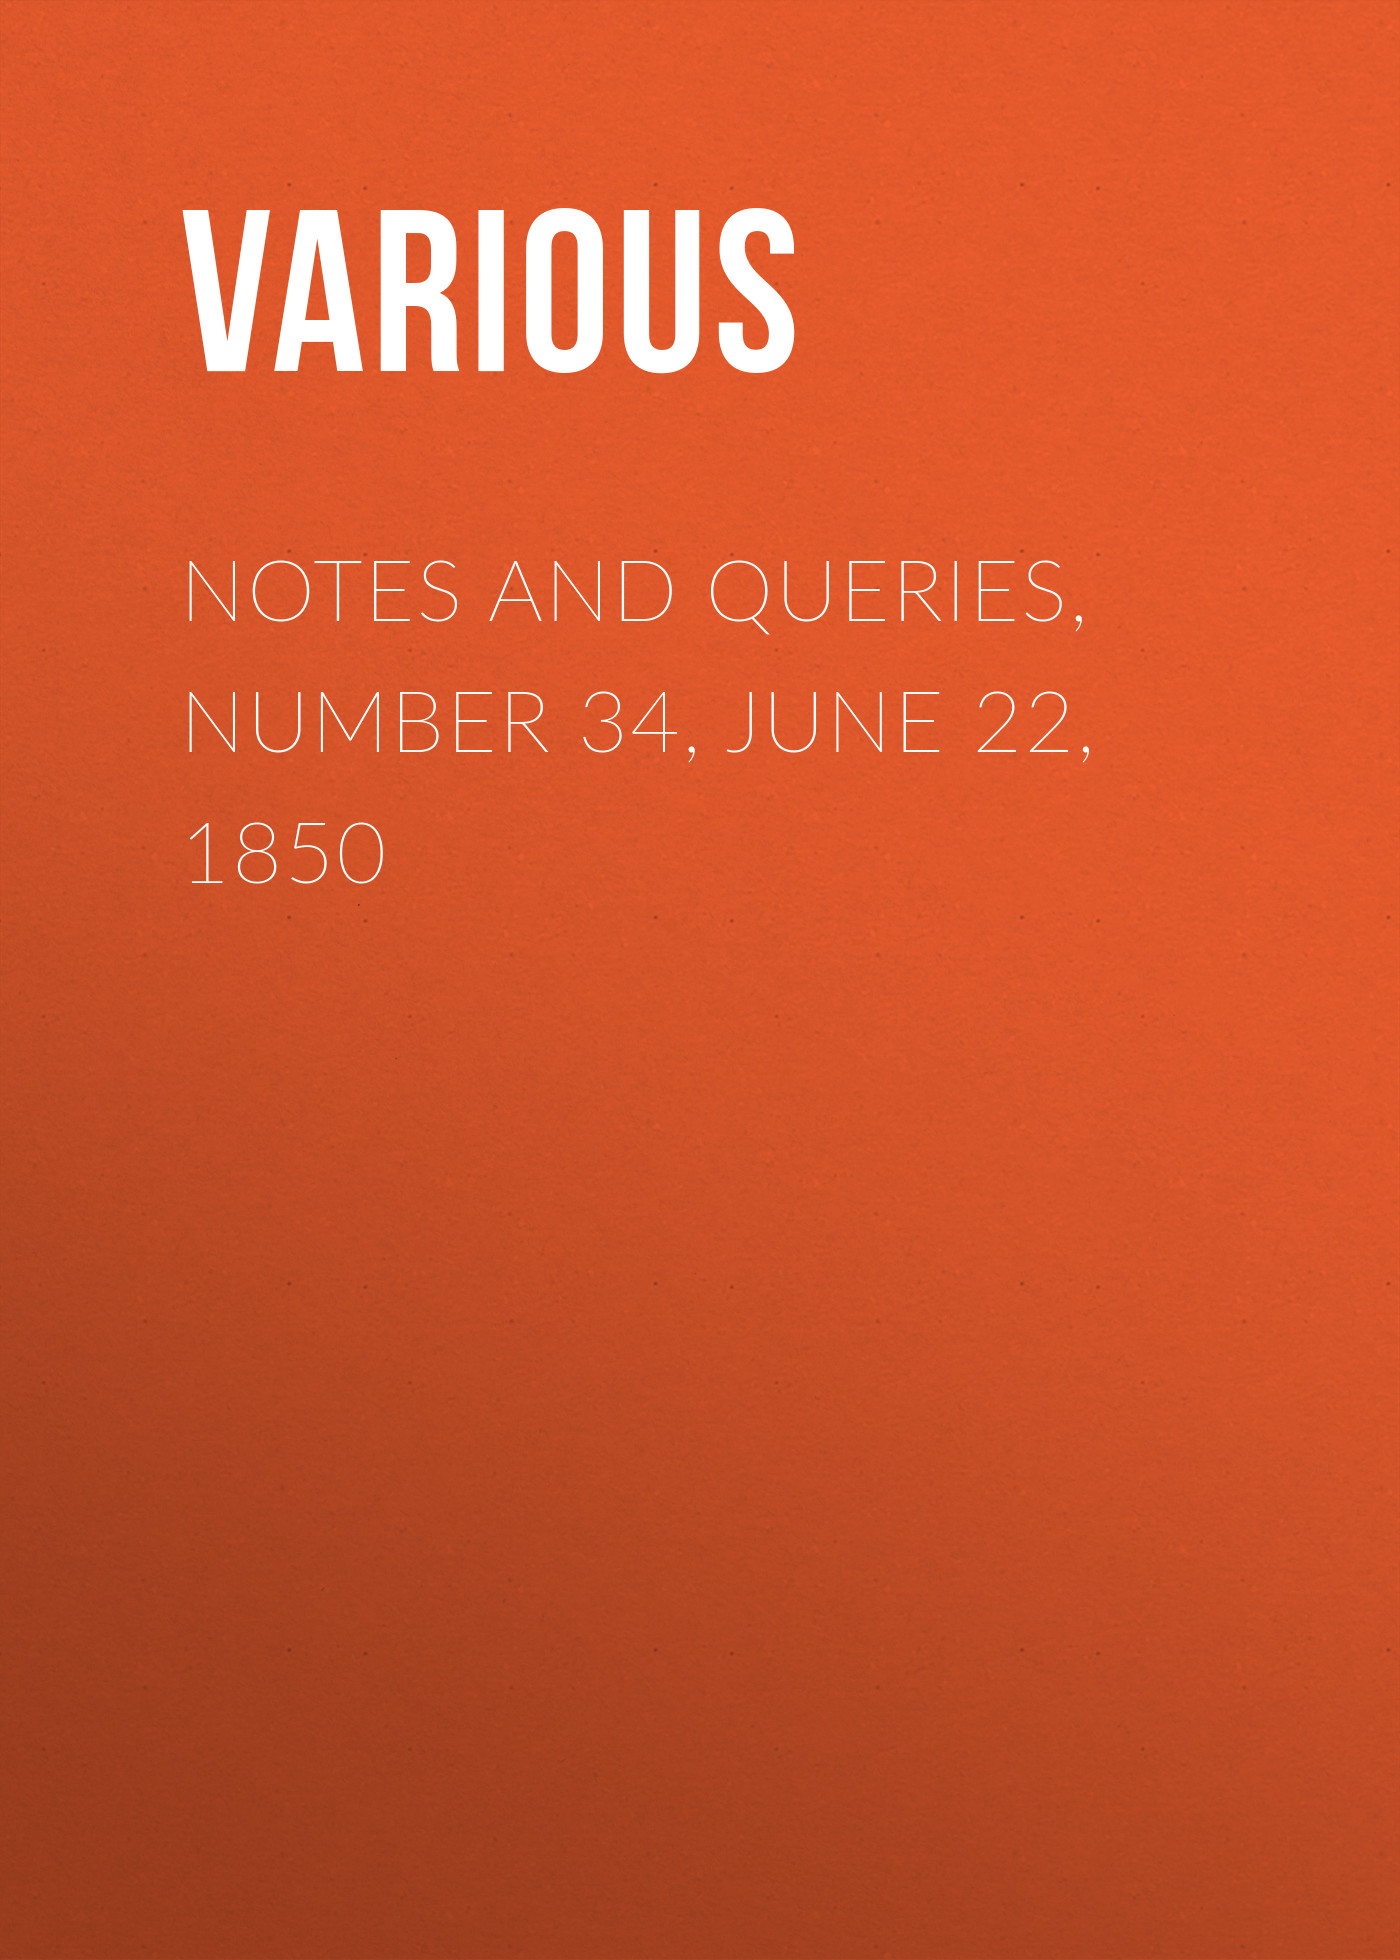 Notes and Queries, Number 34, June 22, 1850